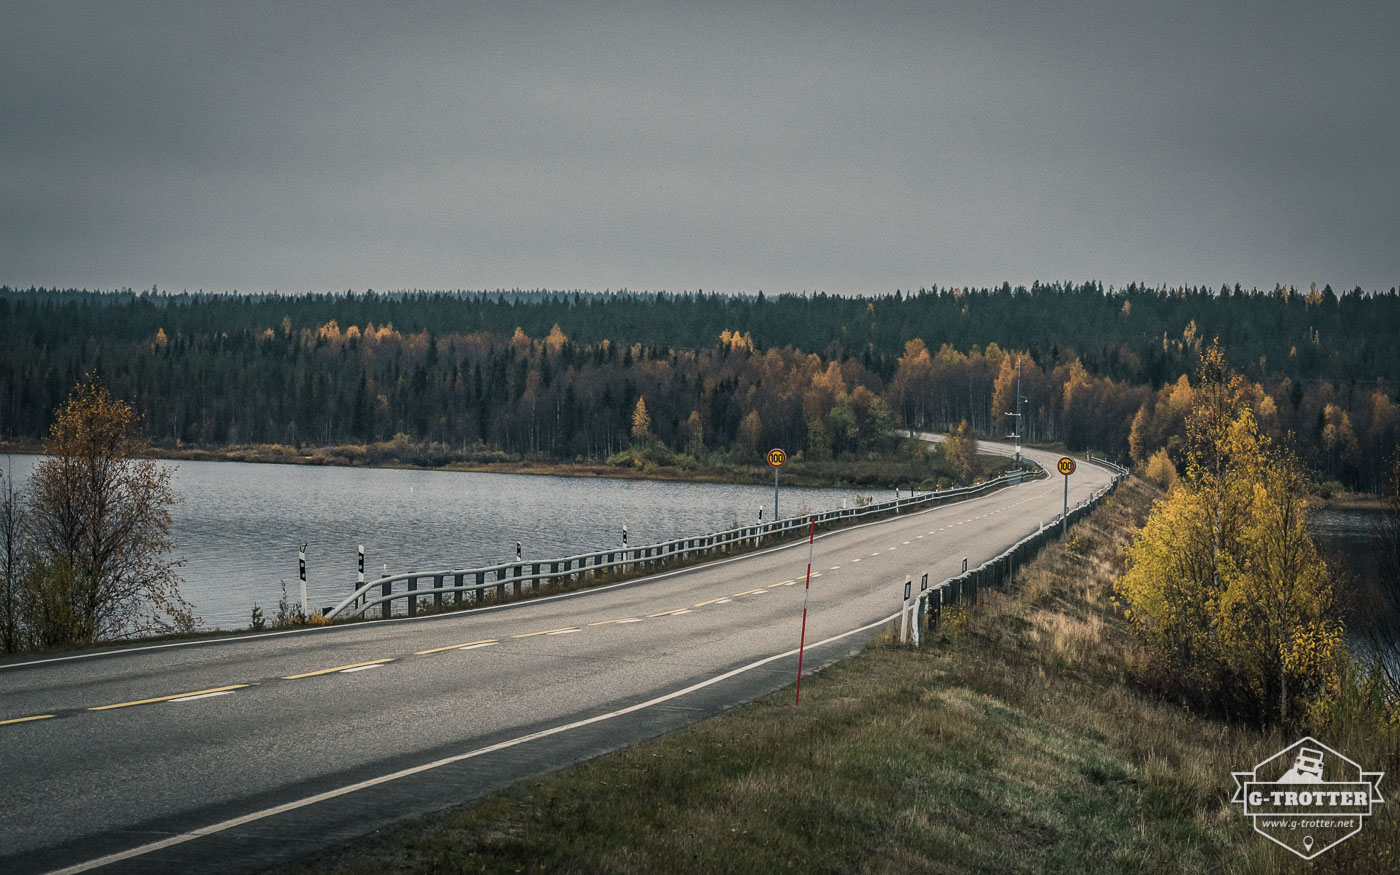 Picture 9 of the picture gallery “Roads of Finland”